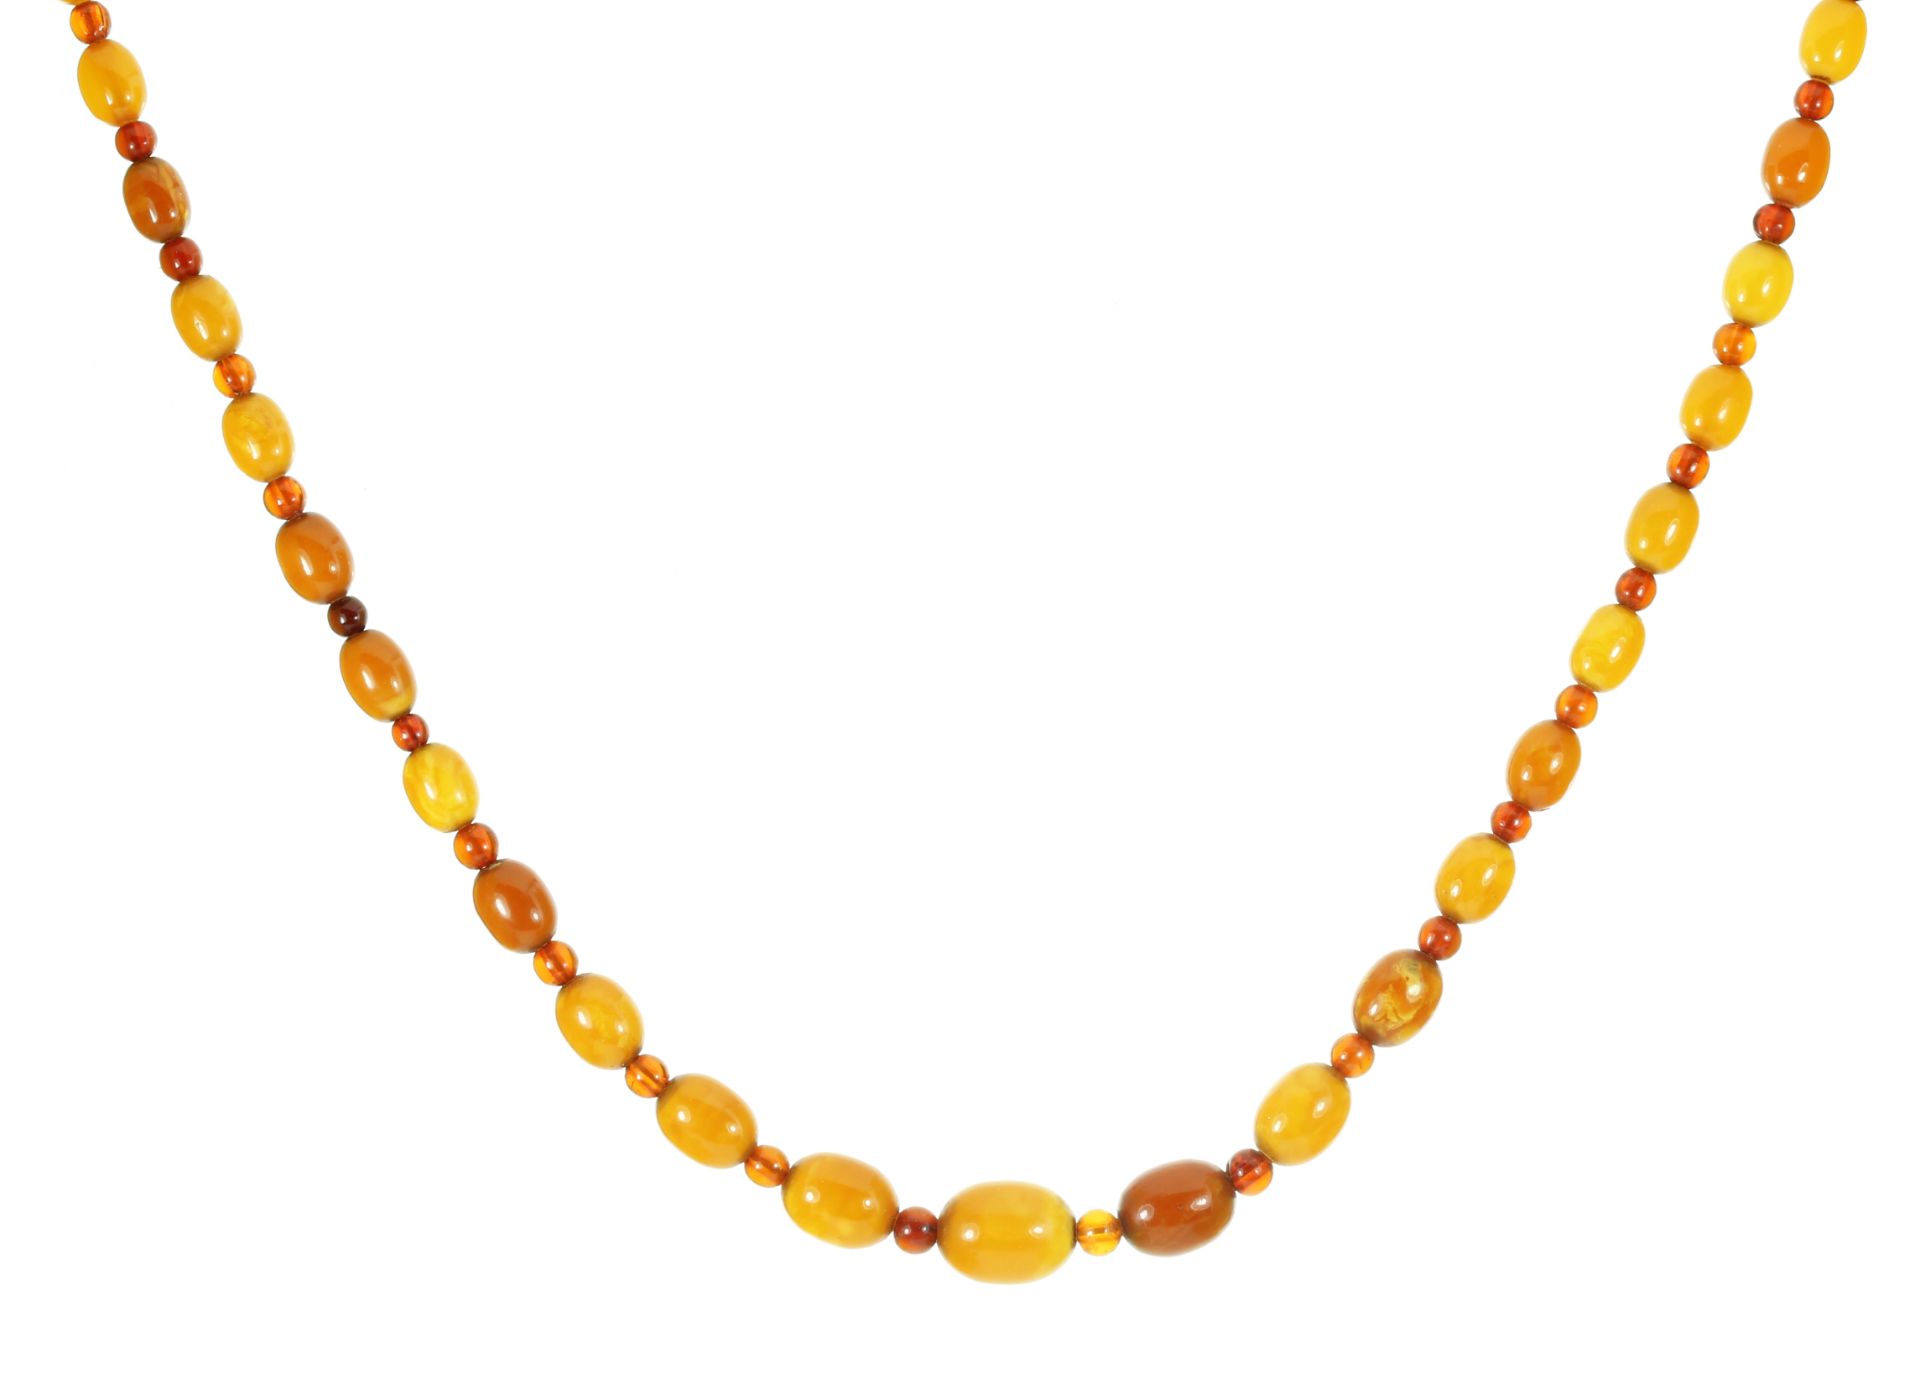 AN ANTIQUE NATURAL AMBER BEAD NECKLACE comprising a single row of forty-one gradated polished oval